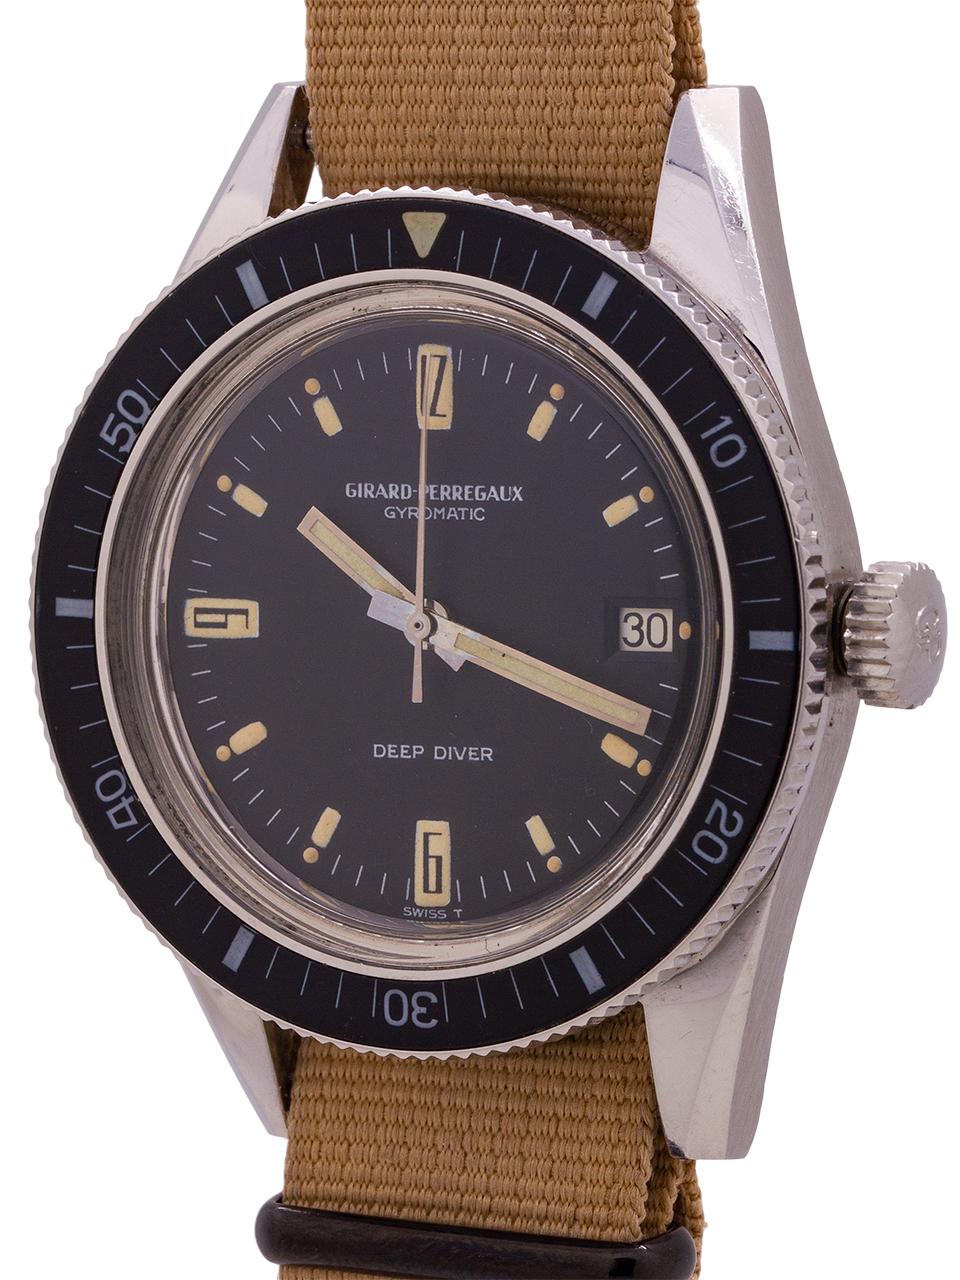 
An extremely rare Girard Perregaux Deep Diver Gyromatic ref 8867V circa 1960’s. Only roughly 400 of these gorgeous divers were made, making it quite a rare find, particularly in this pristine condition. Featuring a stainless steel 38.5mm case with